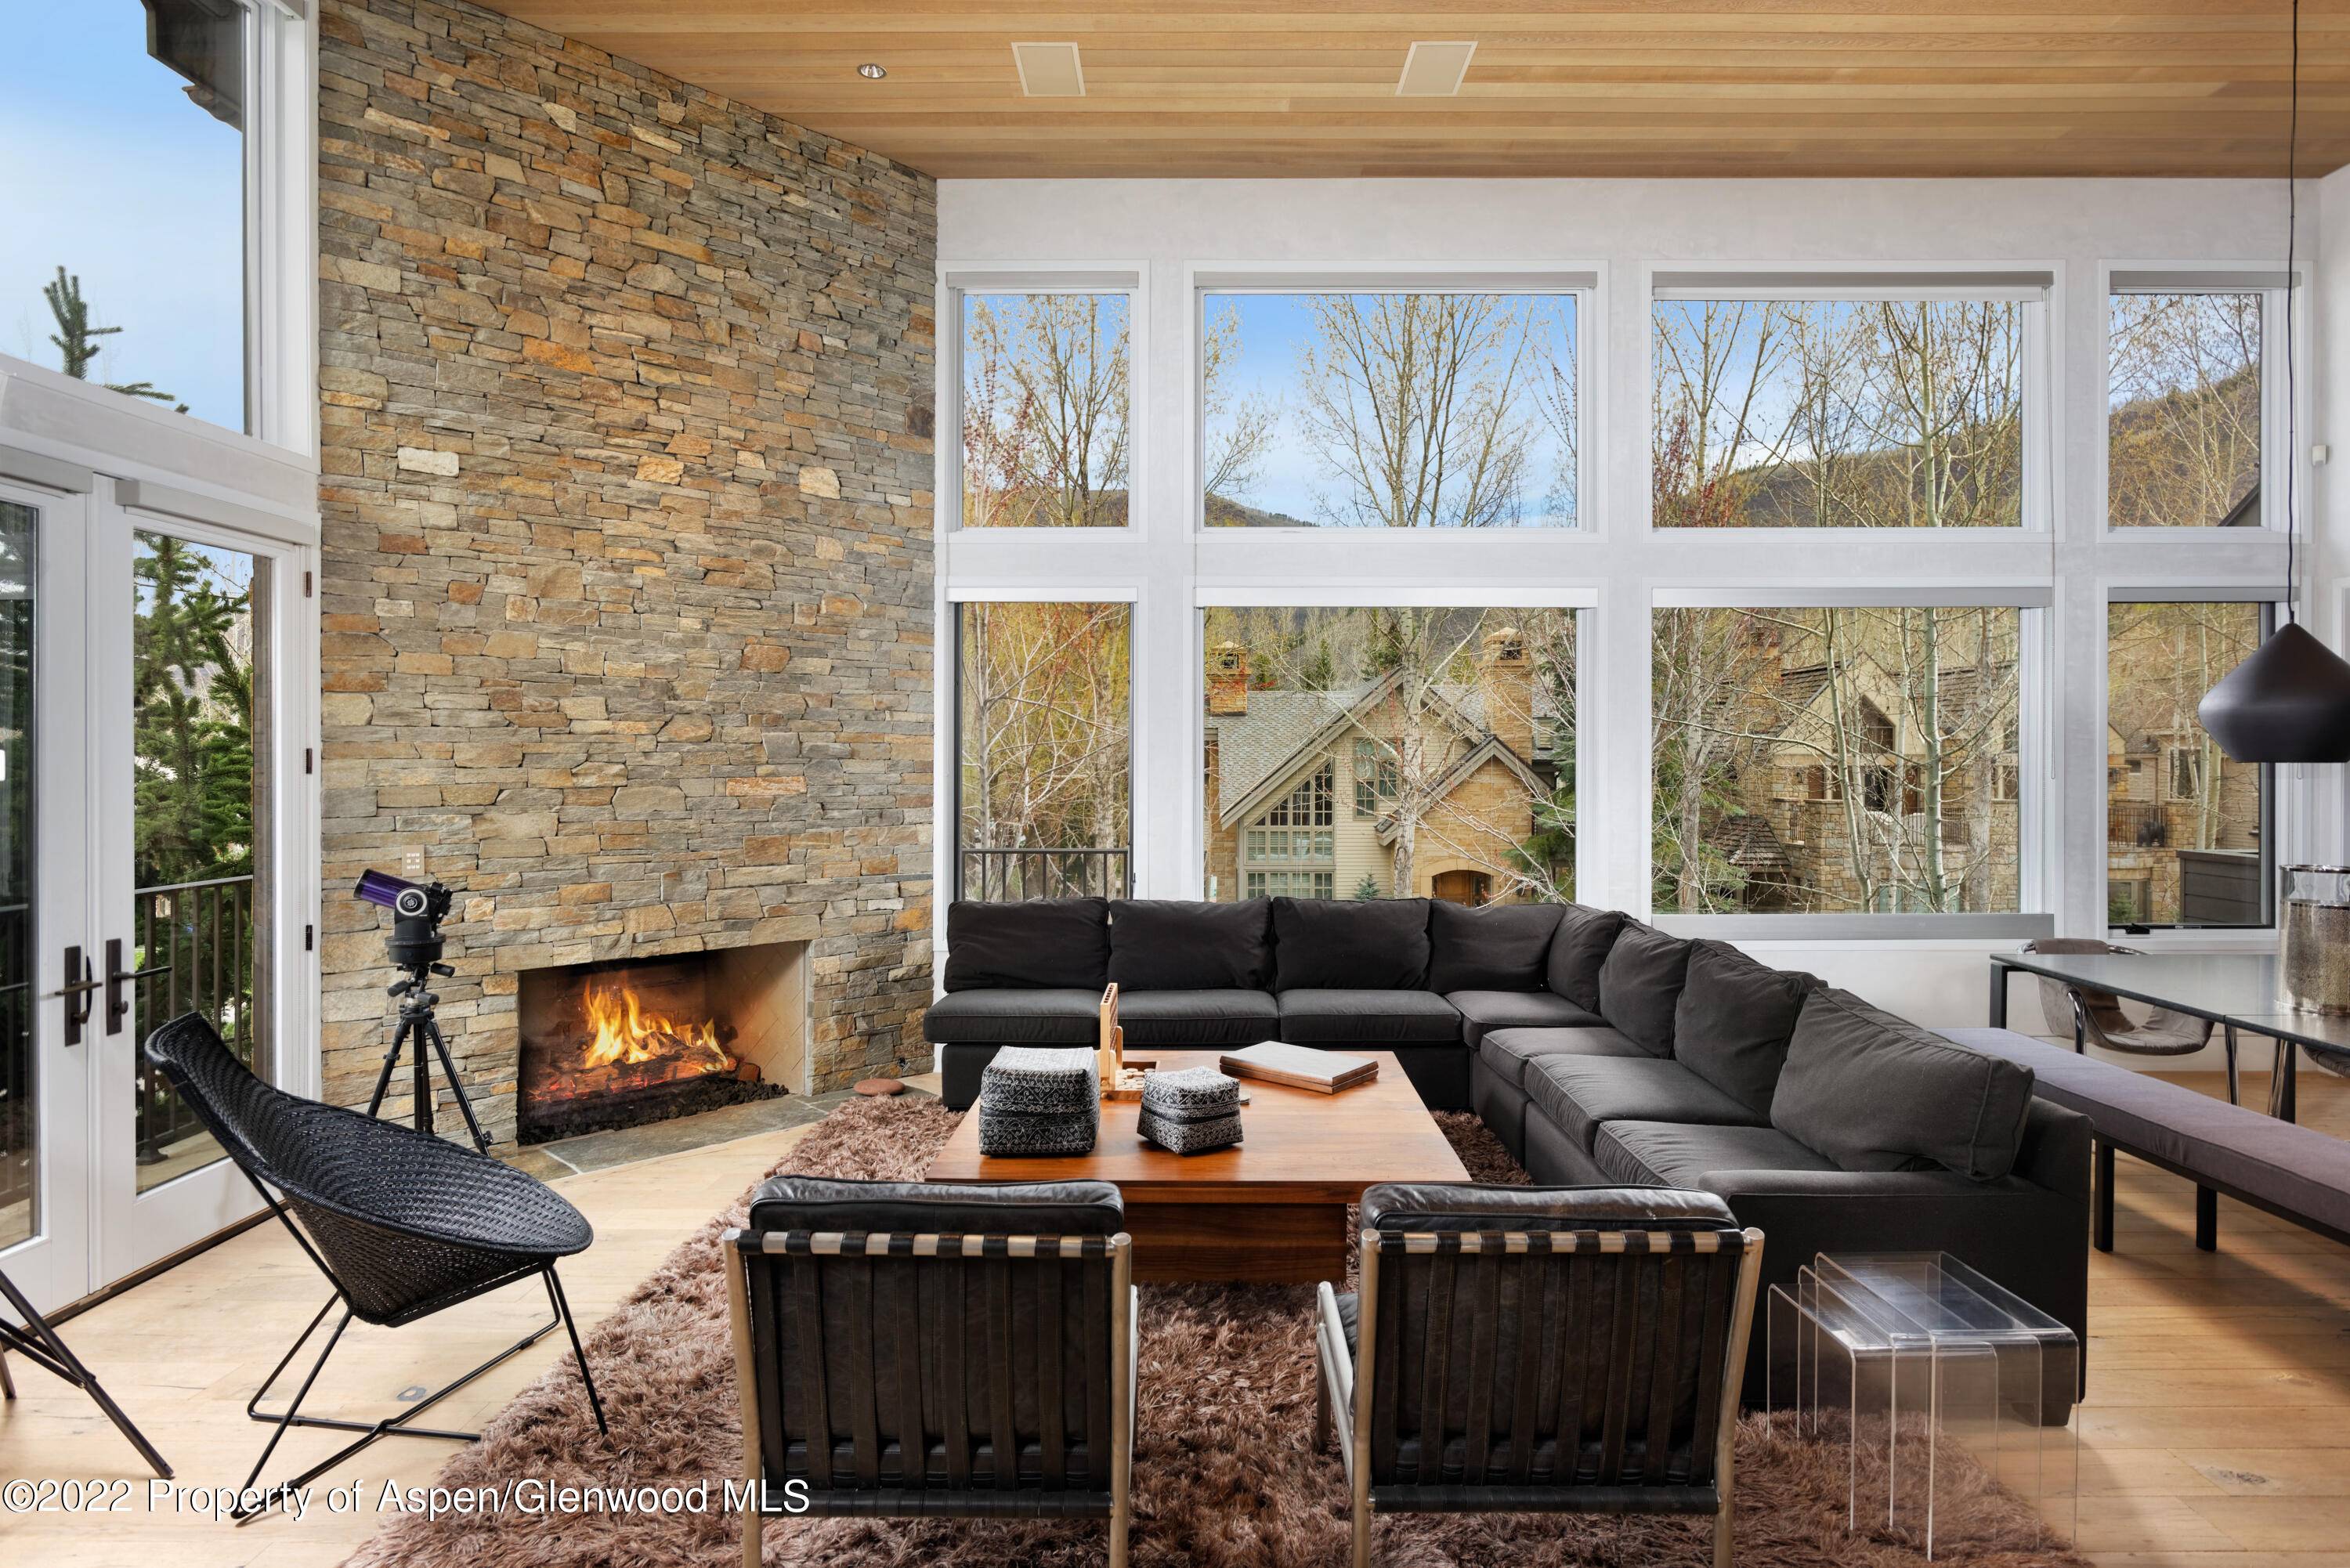 STR PERMIT 080696 One of Aspen's core townhomes with contemporary styling, this 3, 526 square foot property boasts 4 bedrooms and has an open living, dining and kitchen area on ...